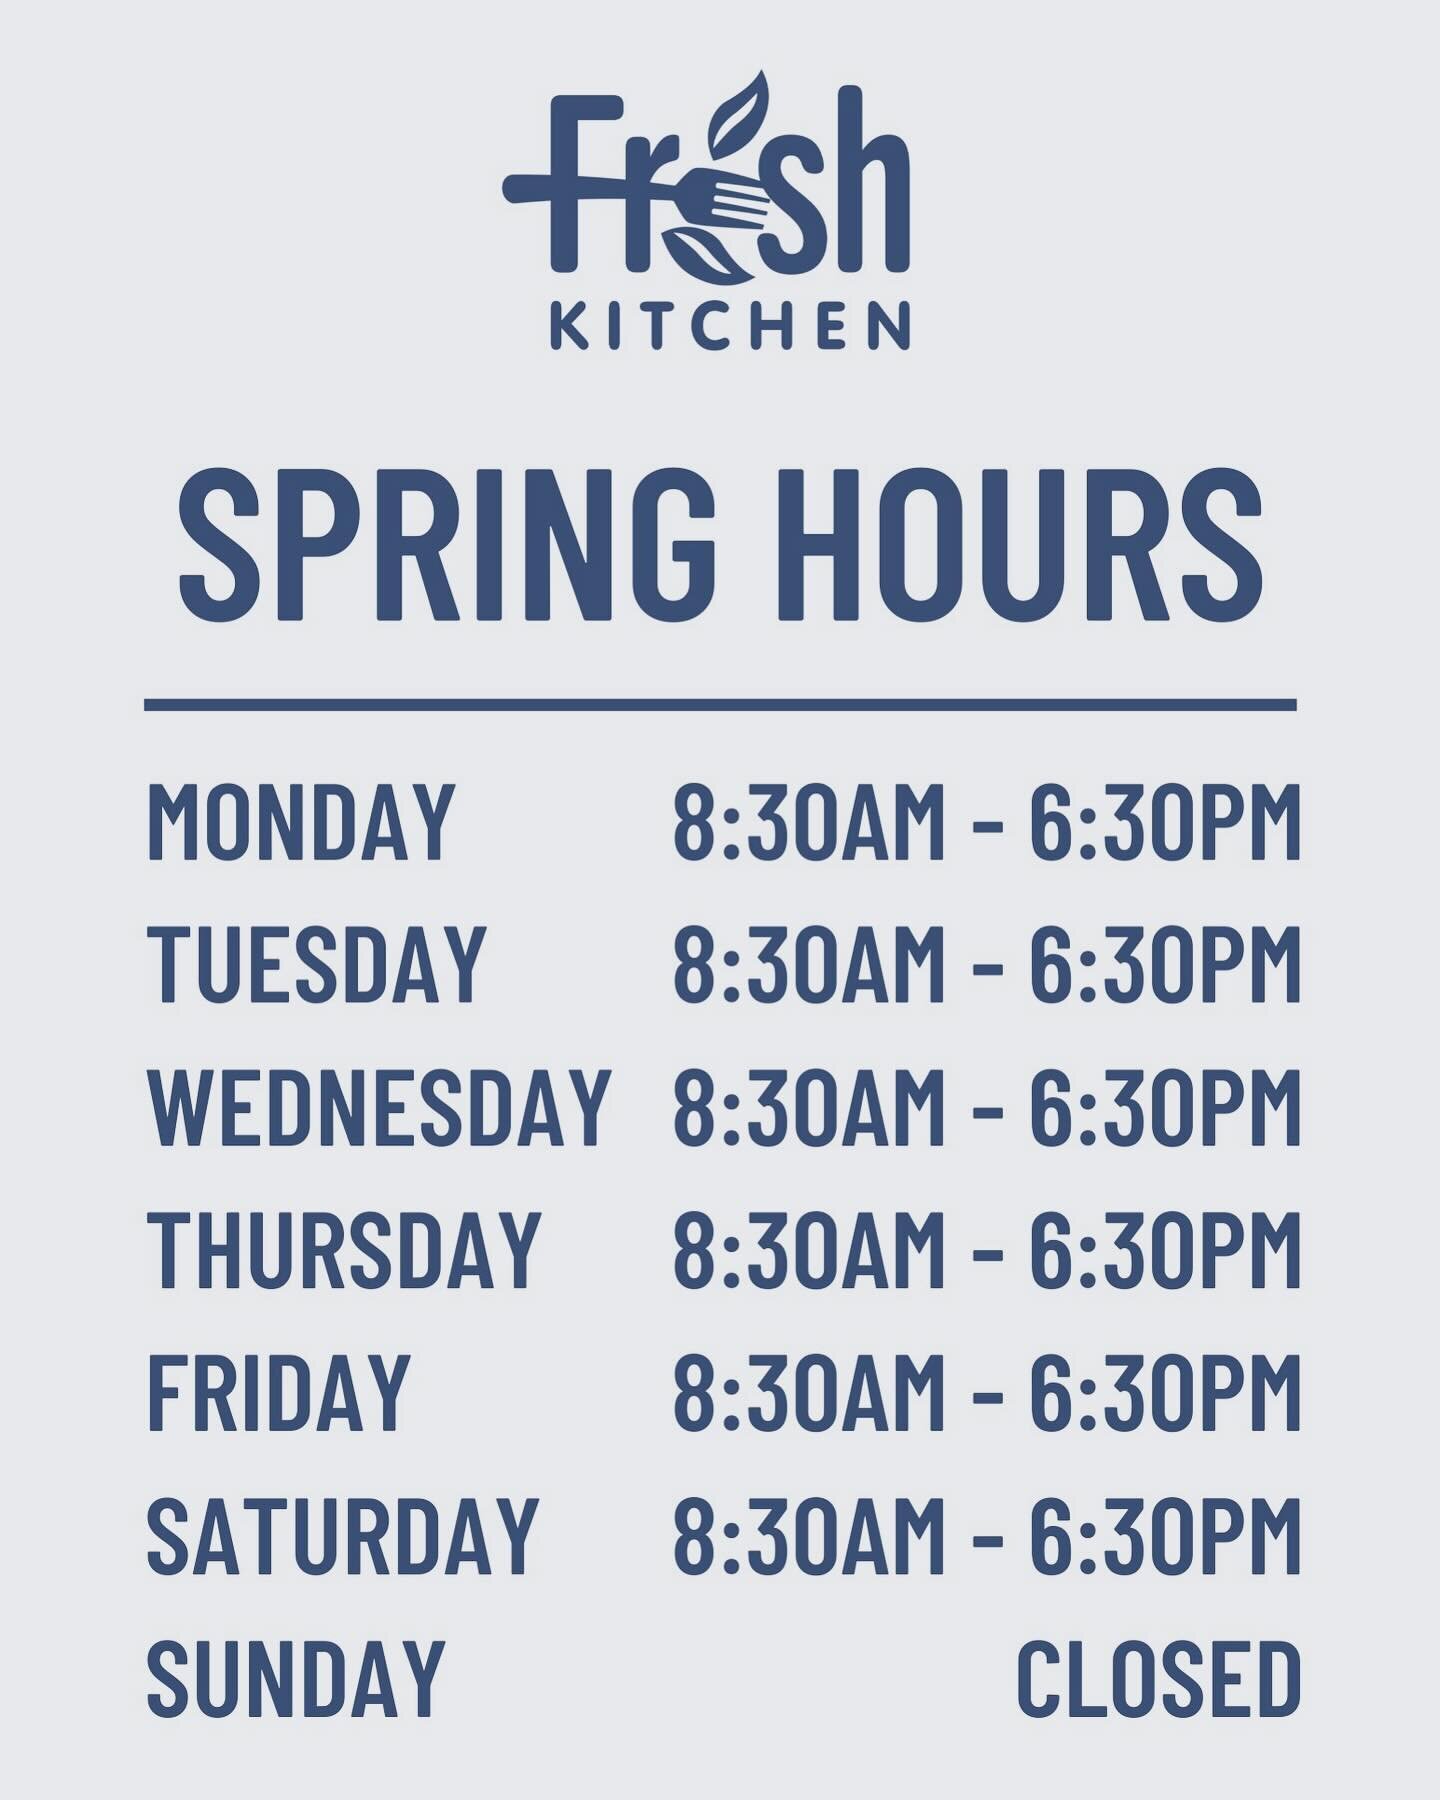 🎉 Exciting News Alert! 🎉 Starting Monday, April 1st, we&rsquo;re extending our hours! 🕣 We&rsquo;ll be open from 8:30 AM to 6:30 PM, giving you more time to savor our delicious a&ccedil;ai bowls, refreshing boba drinks, and mouthwatering salads an